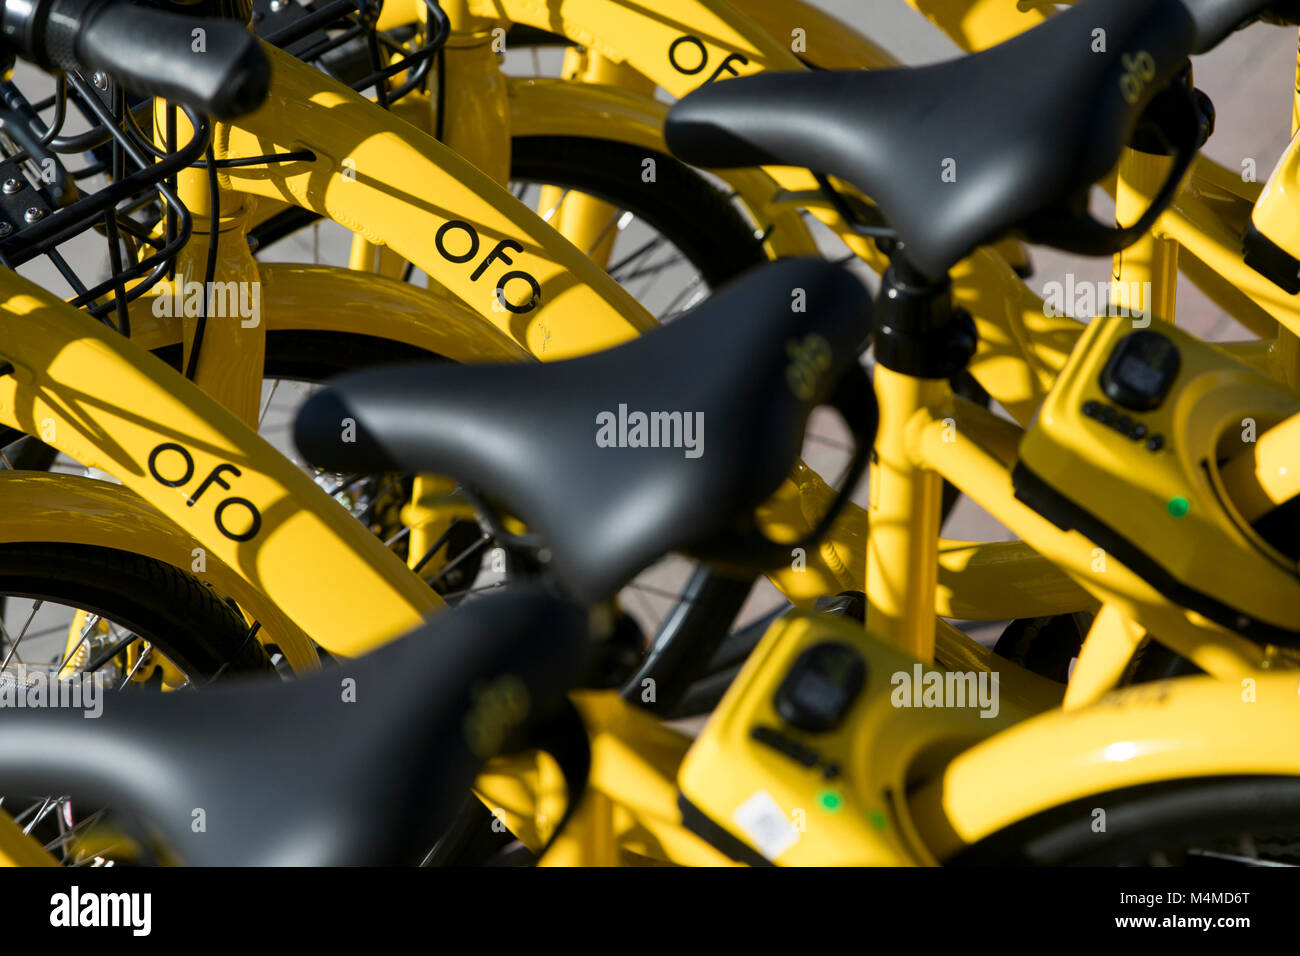 A row of Ofo dock-less bicycle-sharing bikes in Tempe, Arizona, on February 3, 2018. Stock Photo